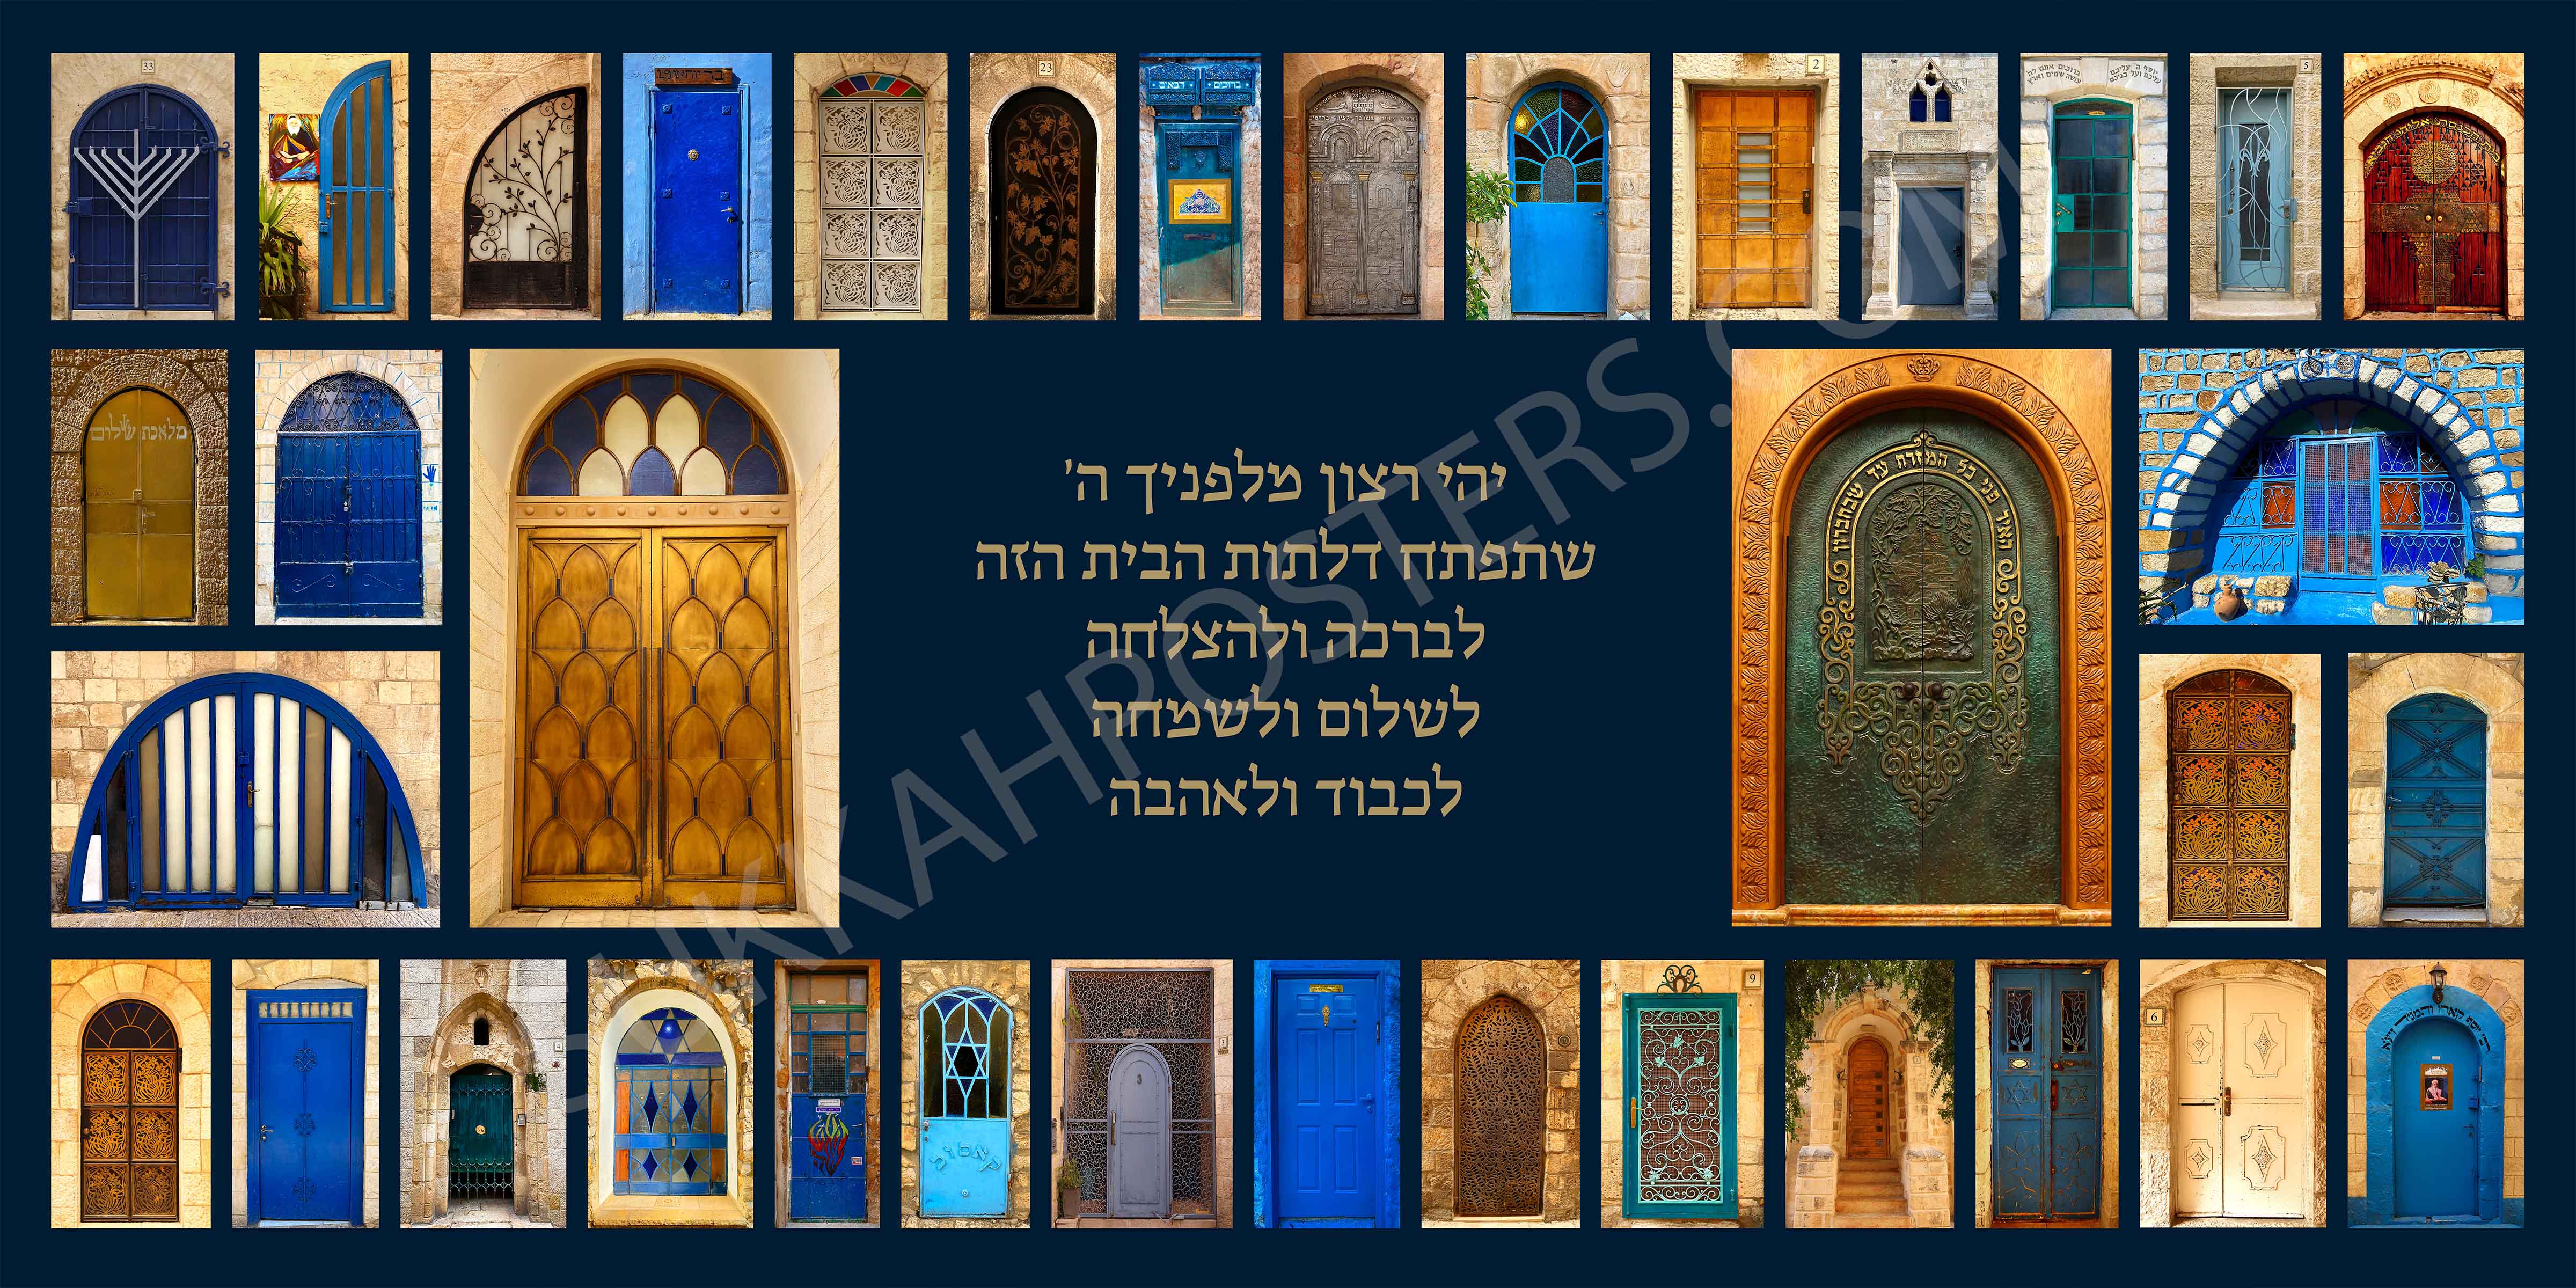 "The Doors of Israel: A Gateway to Blessing" Birchas Habayis Sukkah Mural